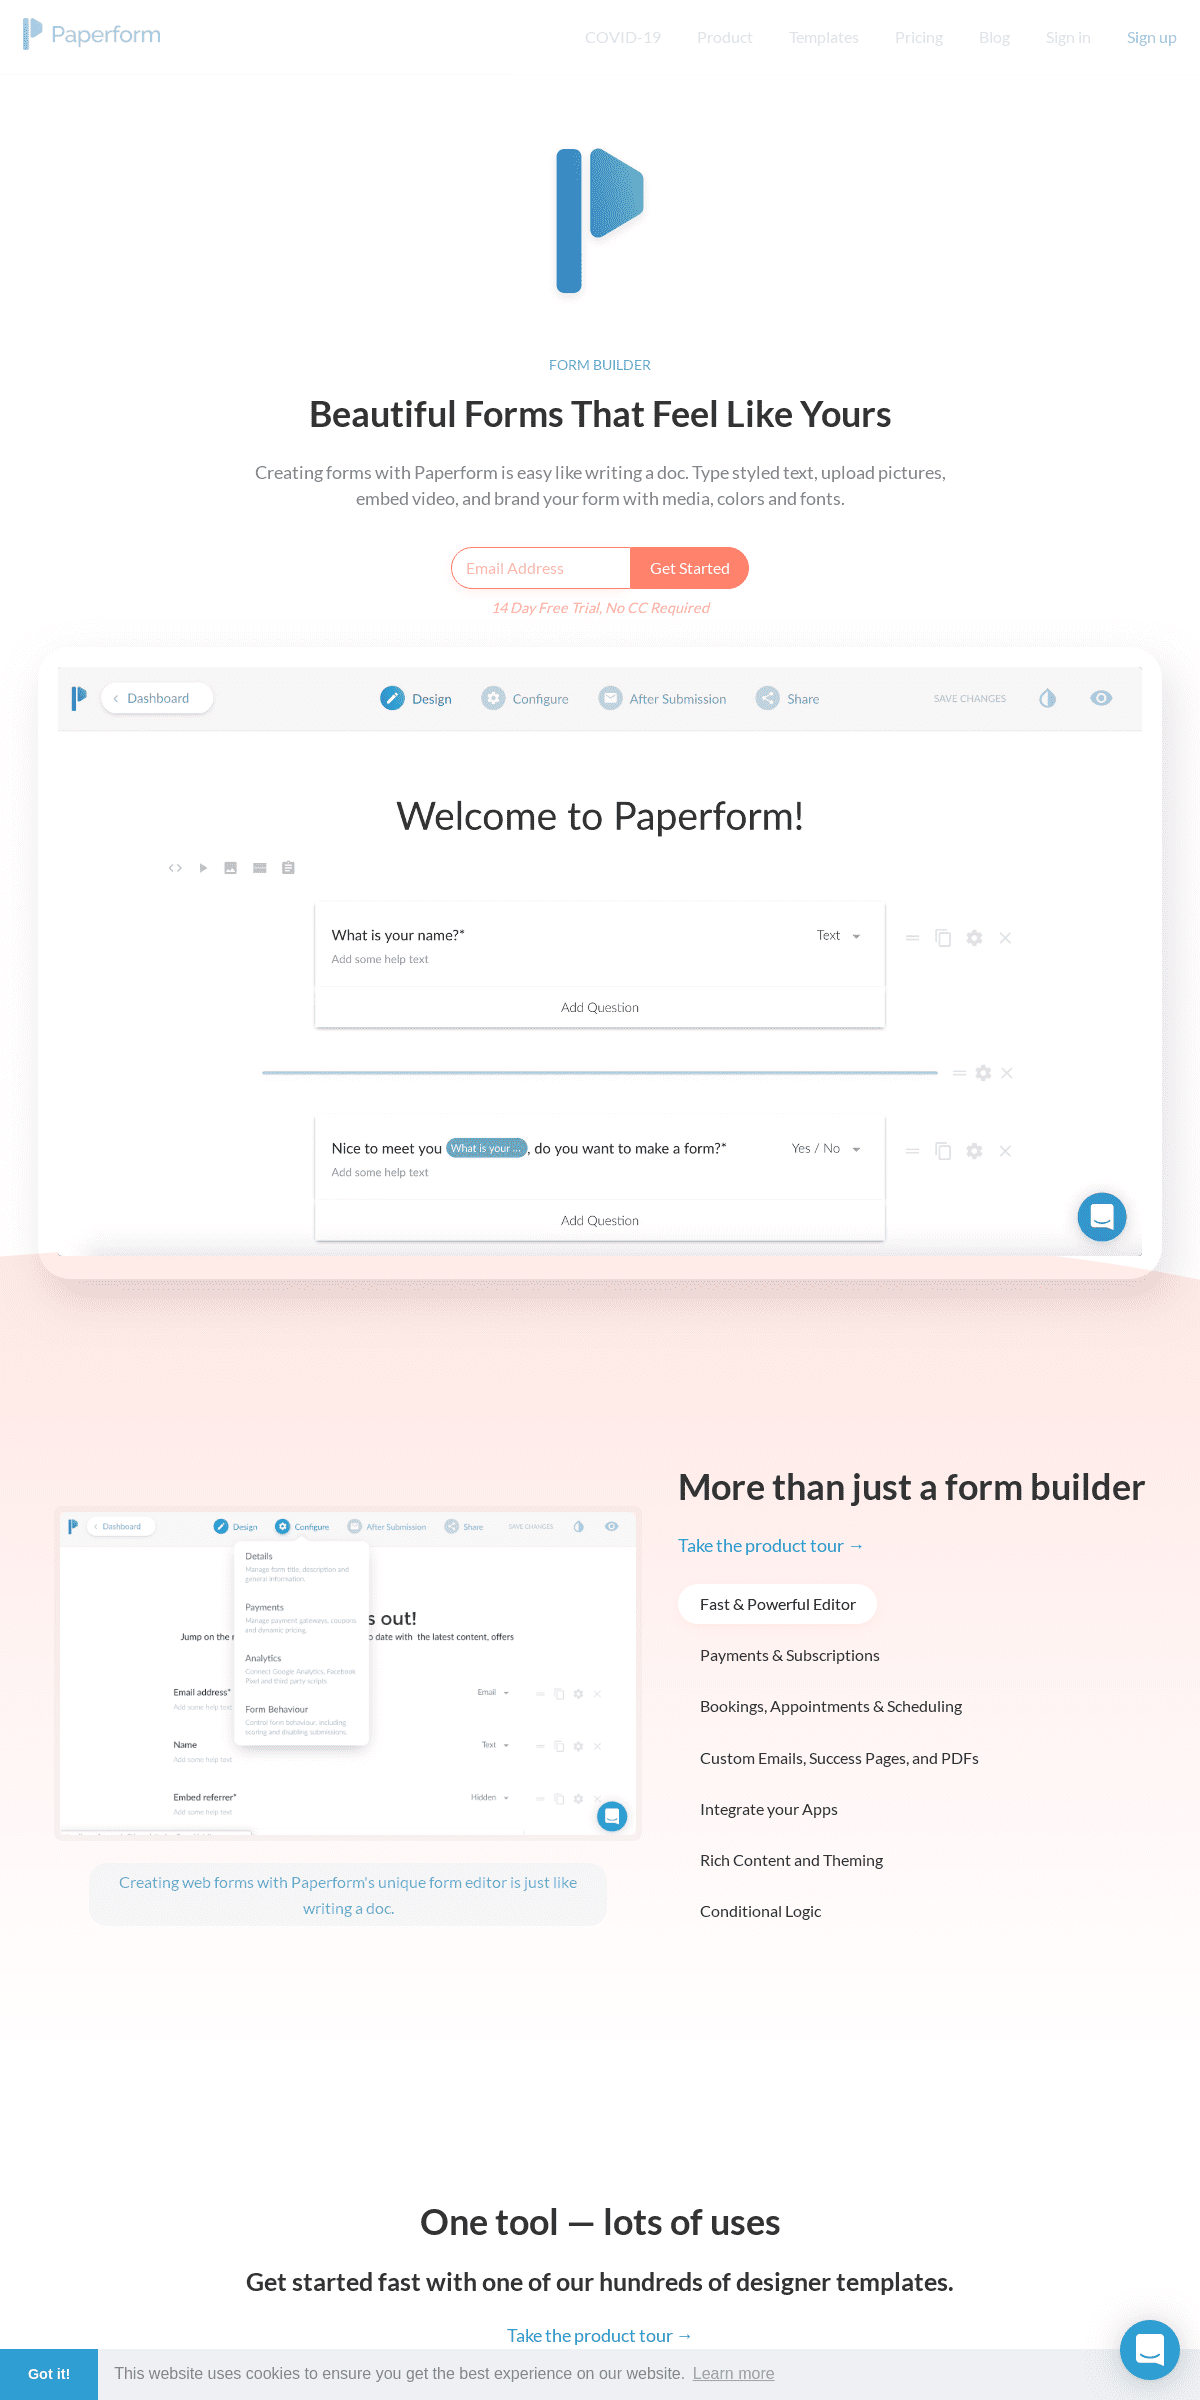 A complete backup of paperform.co